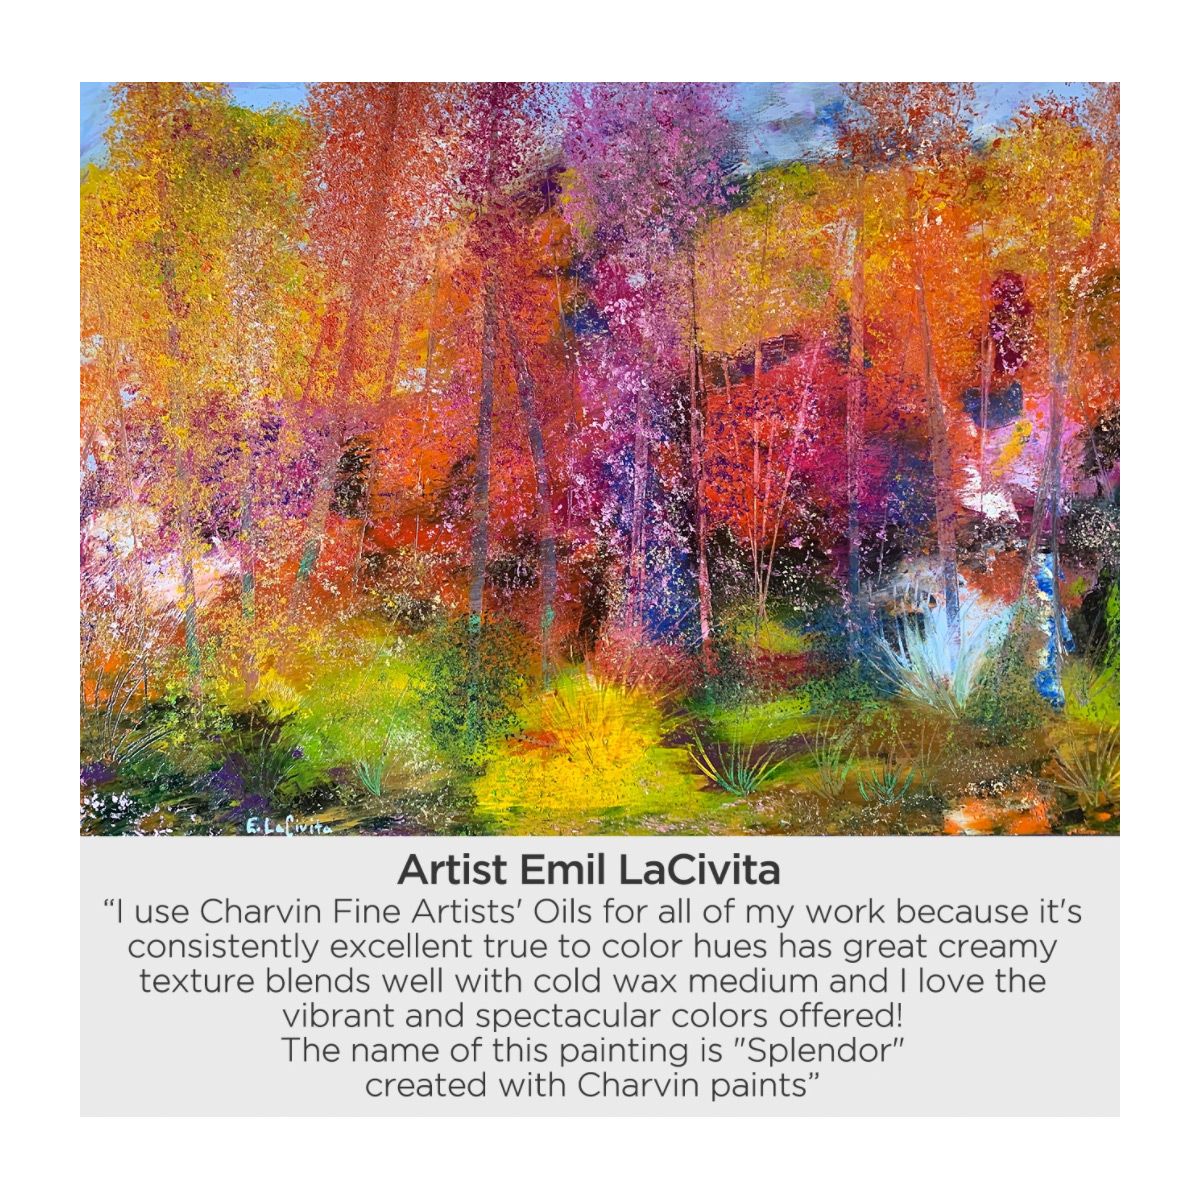 Review by Professional Artist Emil LaCivita